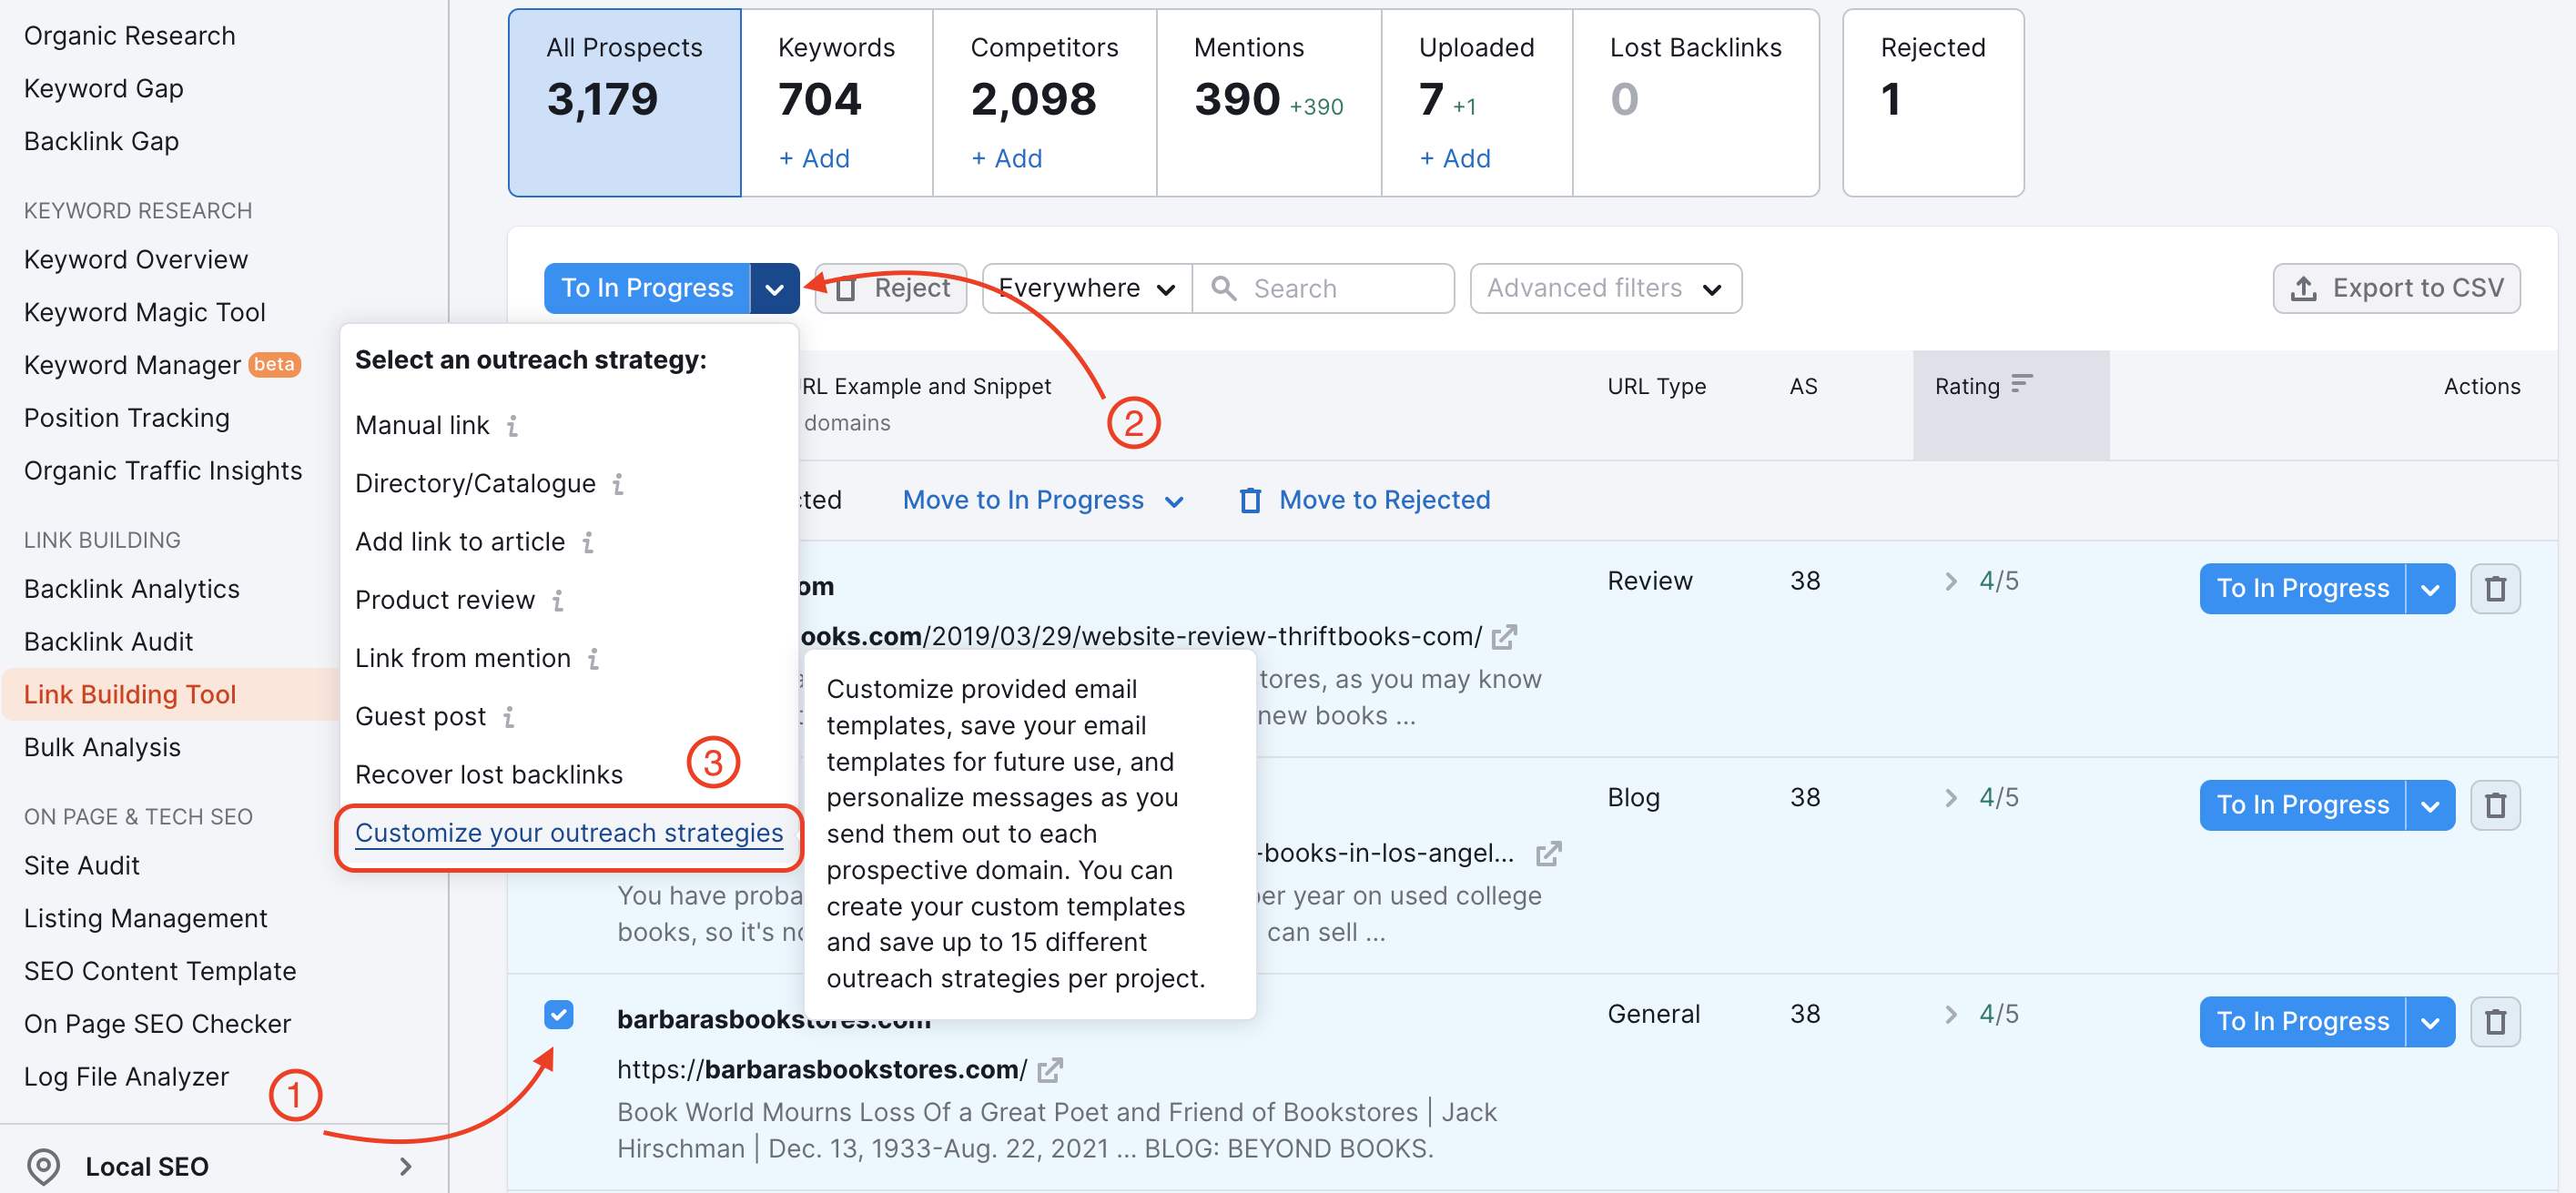 Link Building tool Prospects report: the screenshot shows where to find the menu to customize your outreach strategies and create templates.